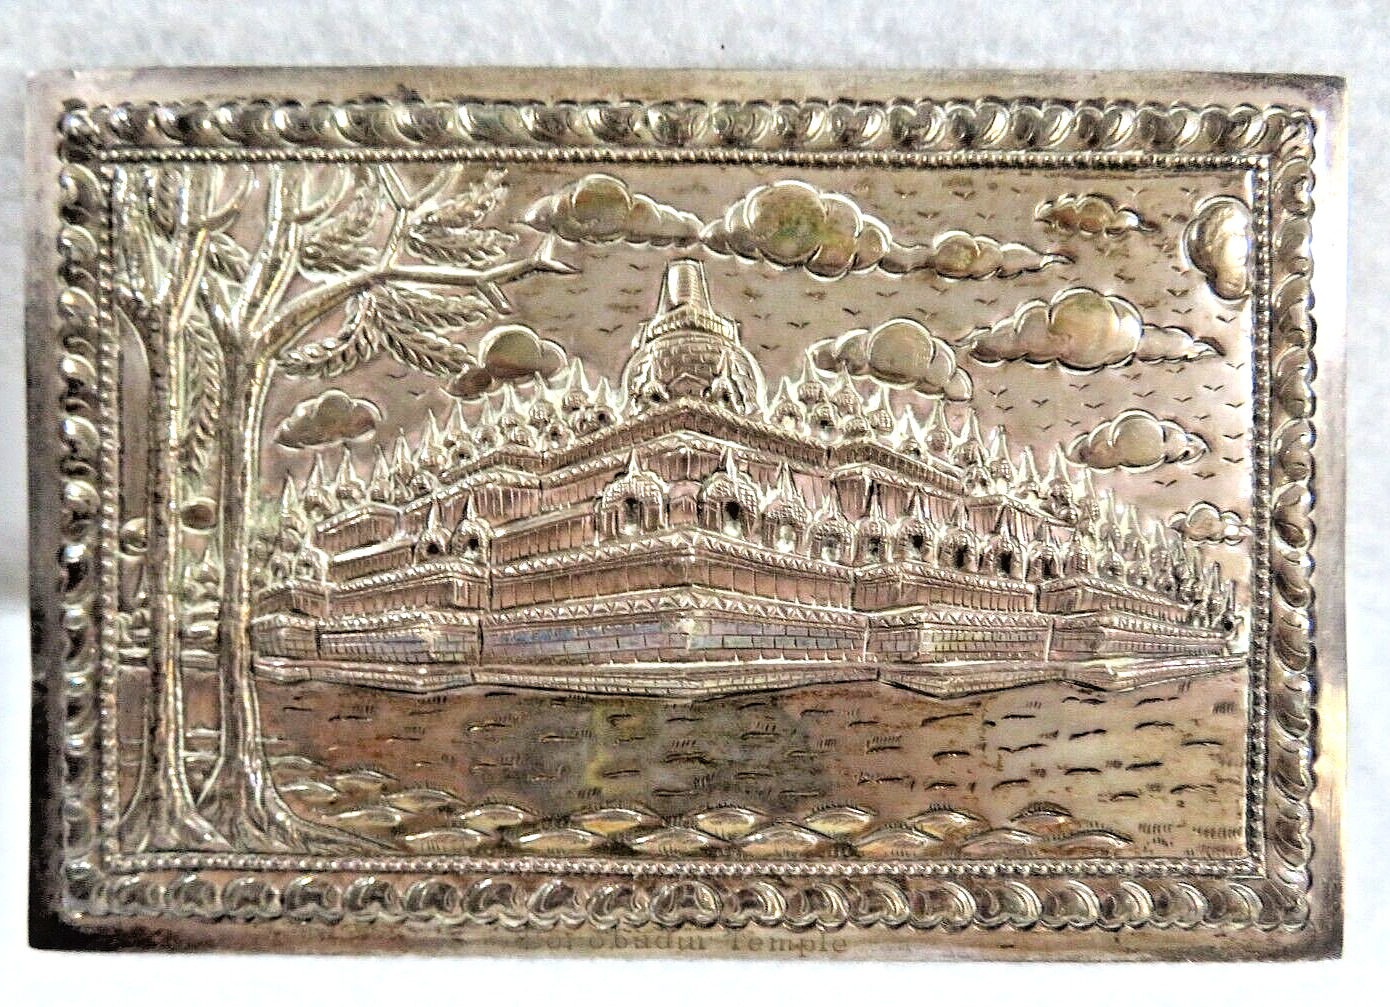 Incredible Antique Heavy Silver? Plaque of Borobudur  Temple in Central Java